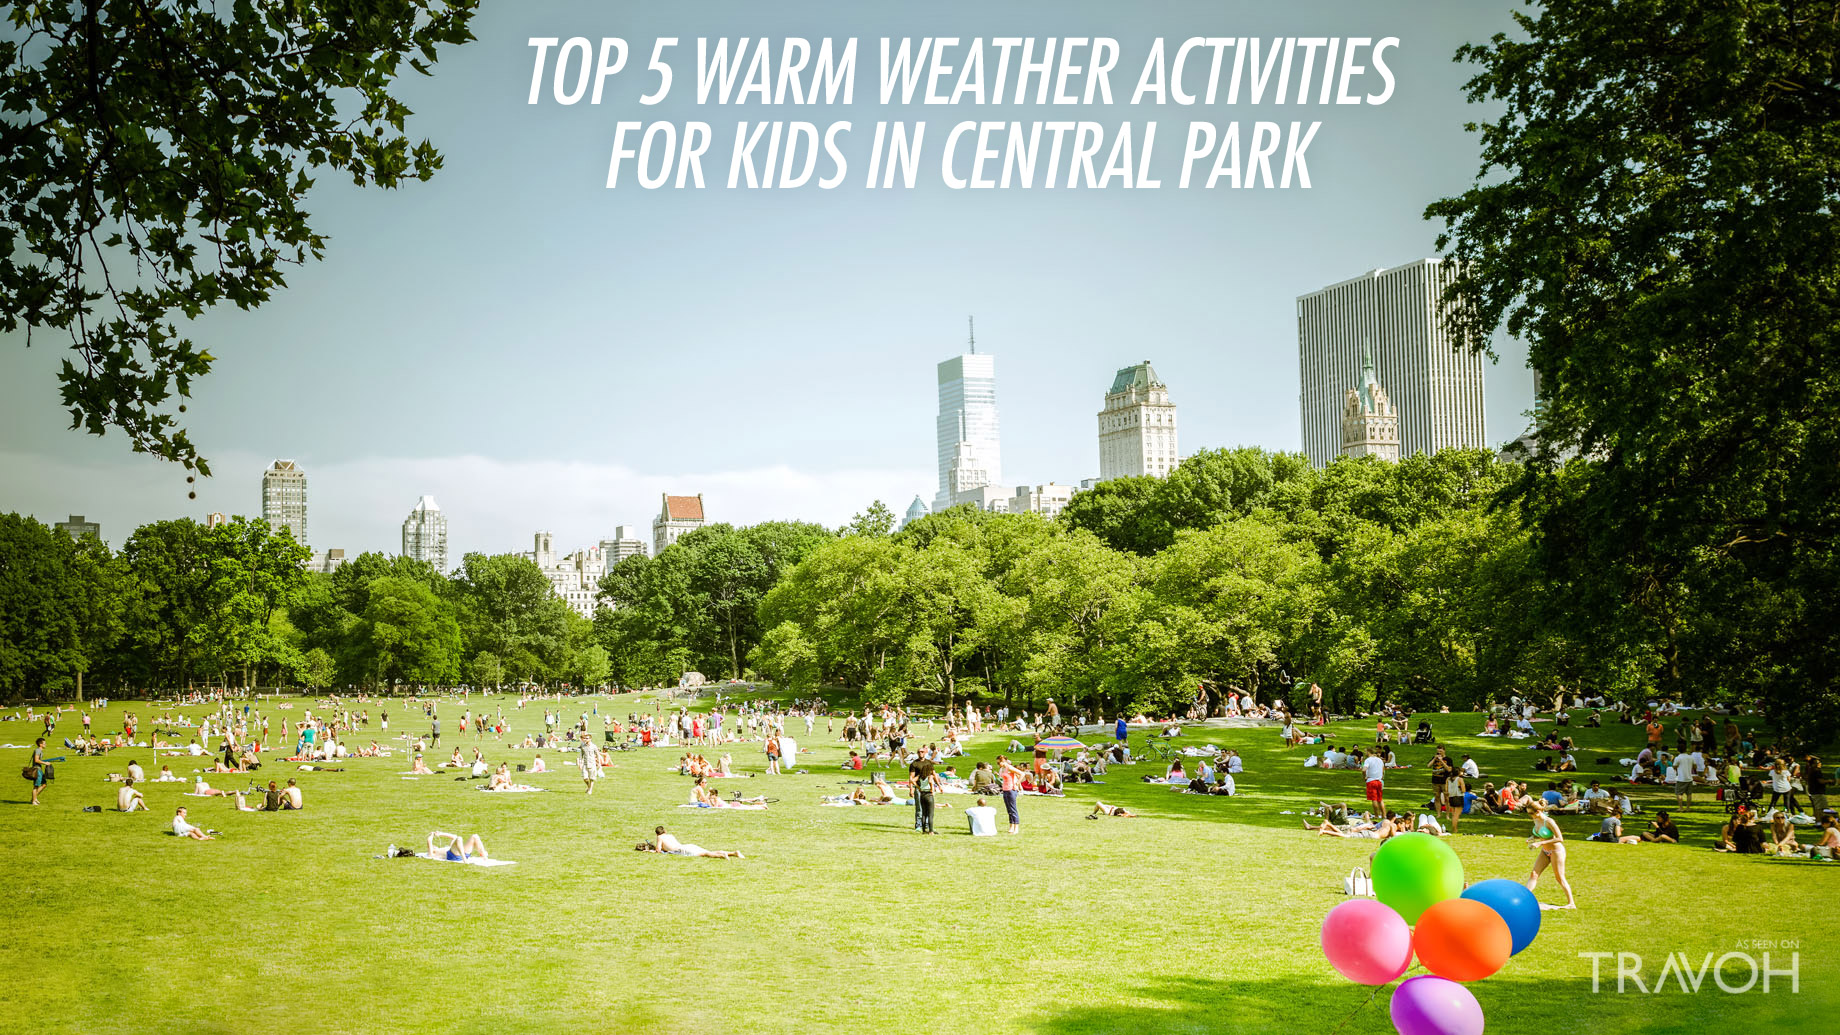 Top 5 Warm Weather Activities for Kids in Central Park